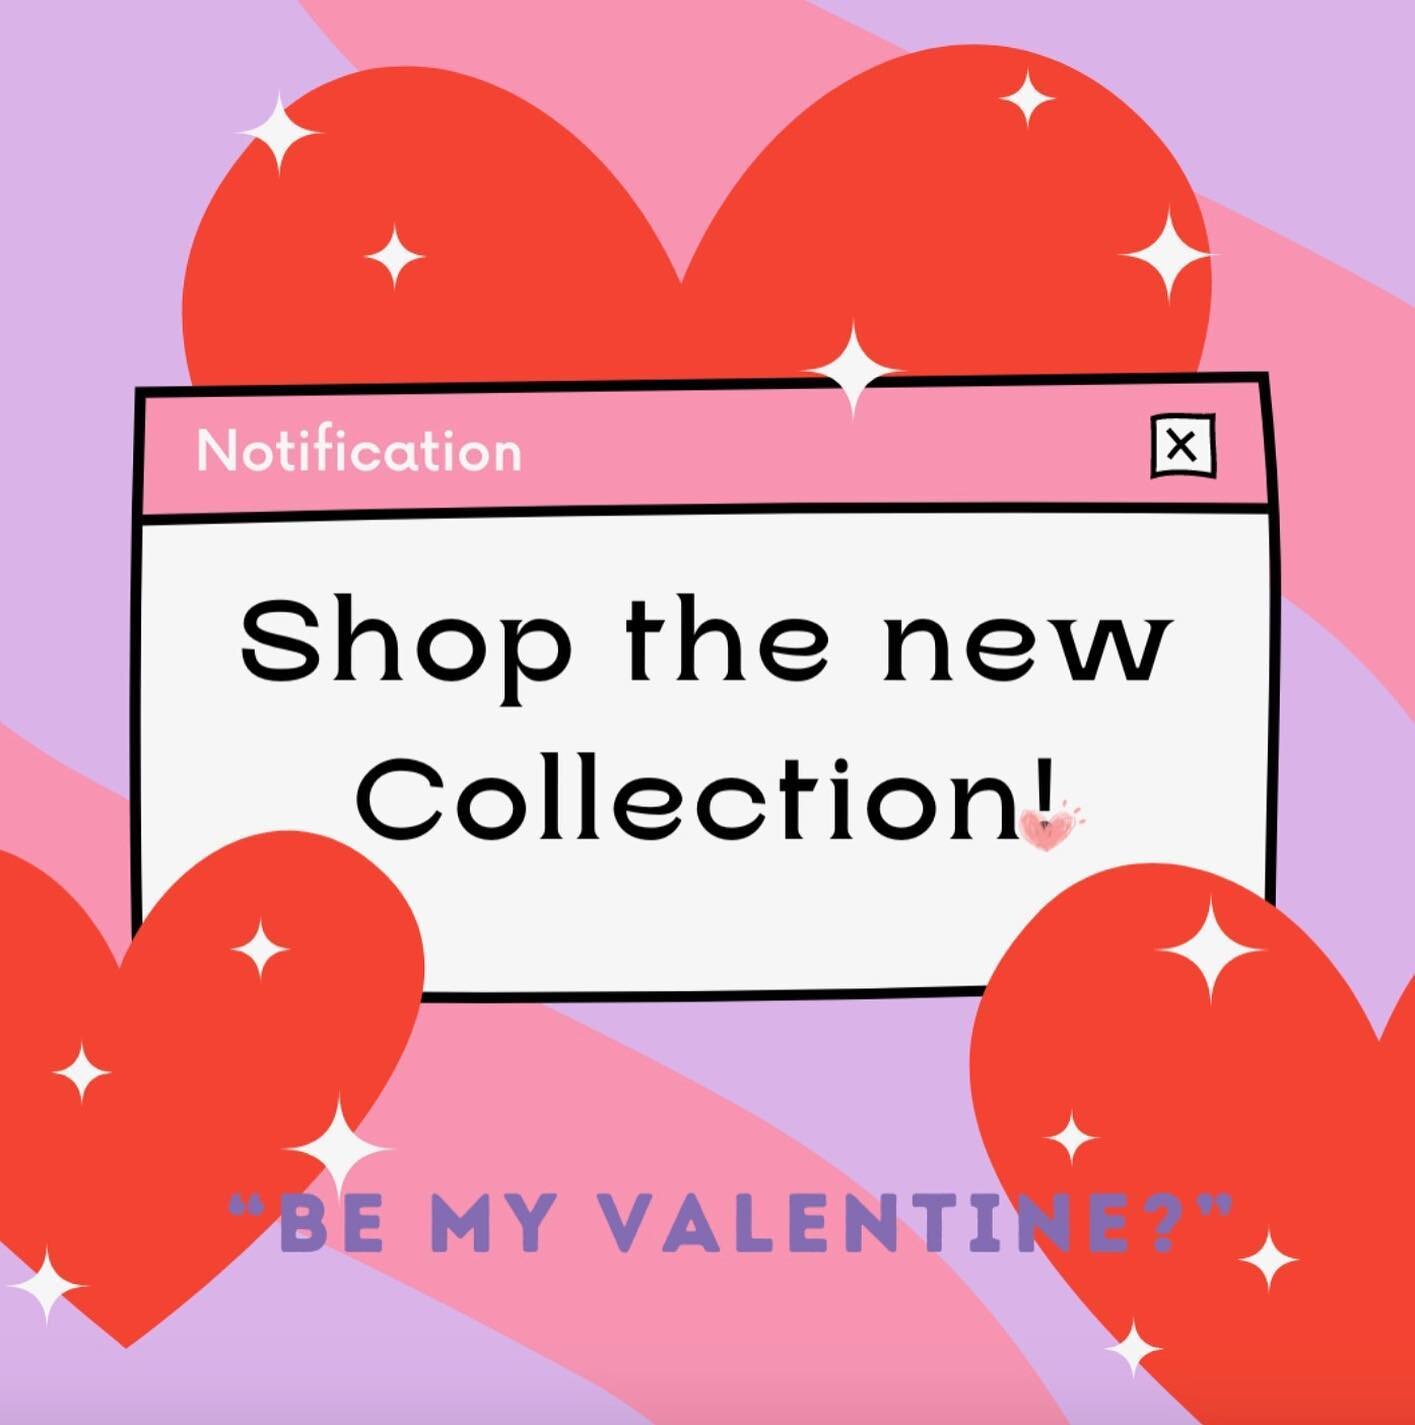 Valentines Day is coming &amp; Student Made has got ya covered! 💖💖
✨
Check out our new Valentines Day collection on our site to find the perfect gift!! 
✨
#studentmade #jmu #studentmadejmu #smallbusiness